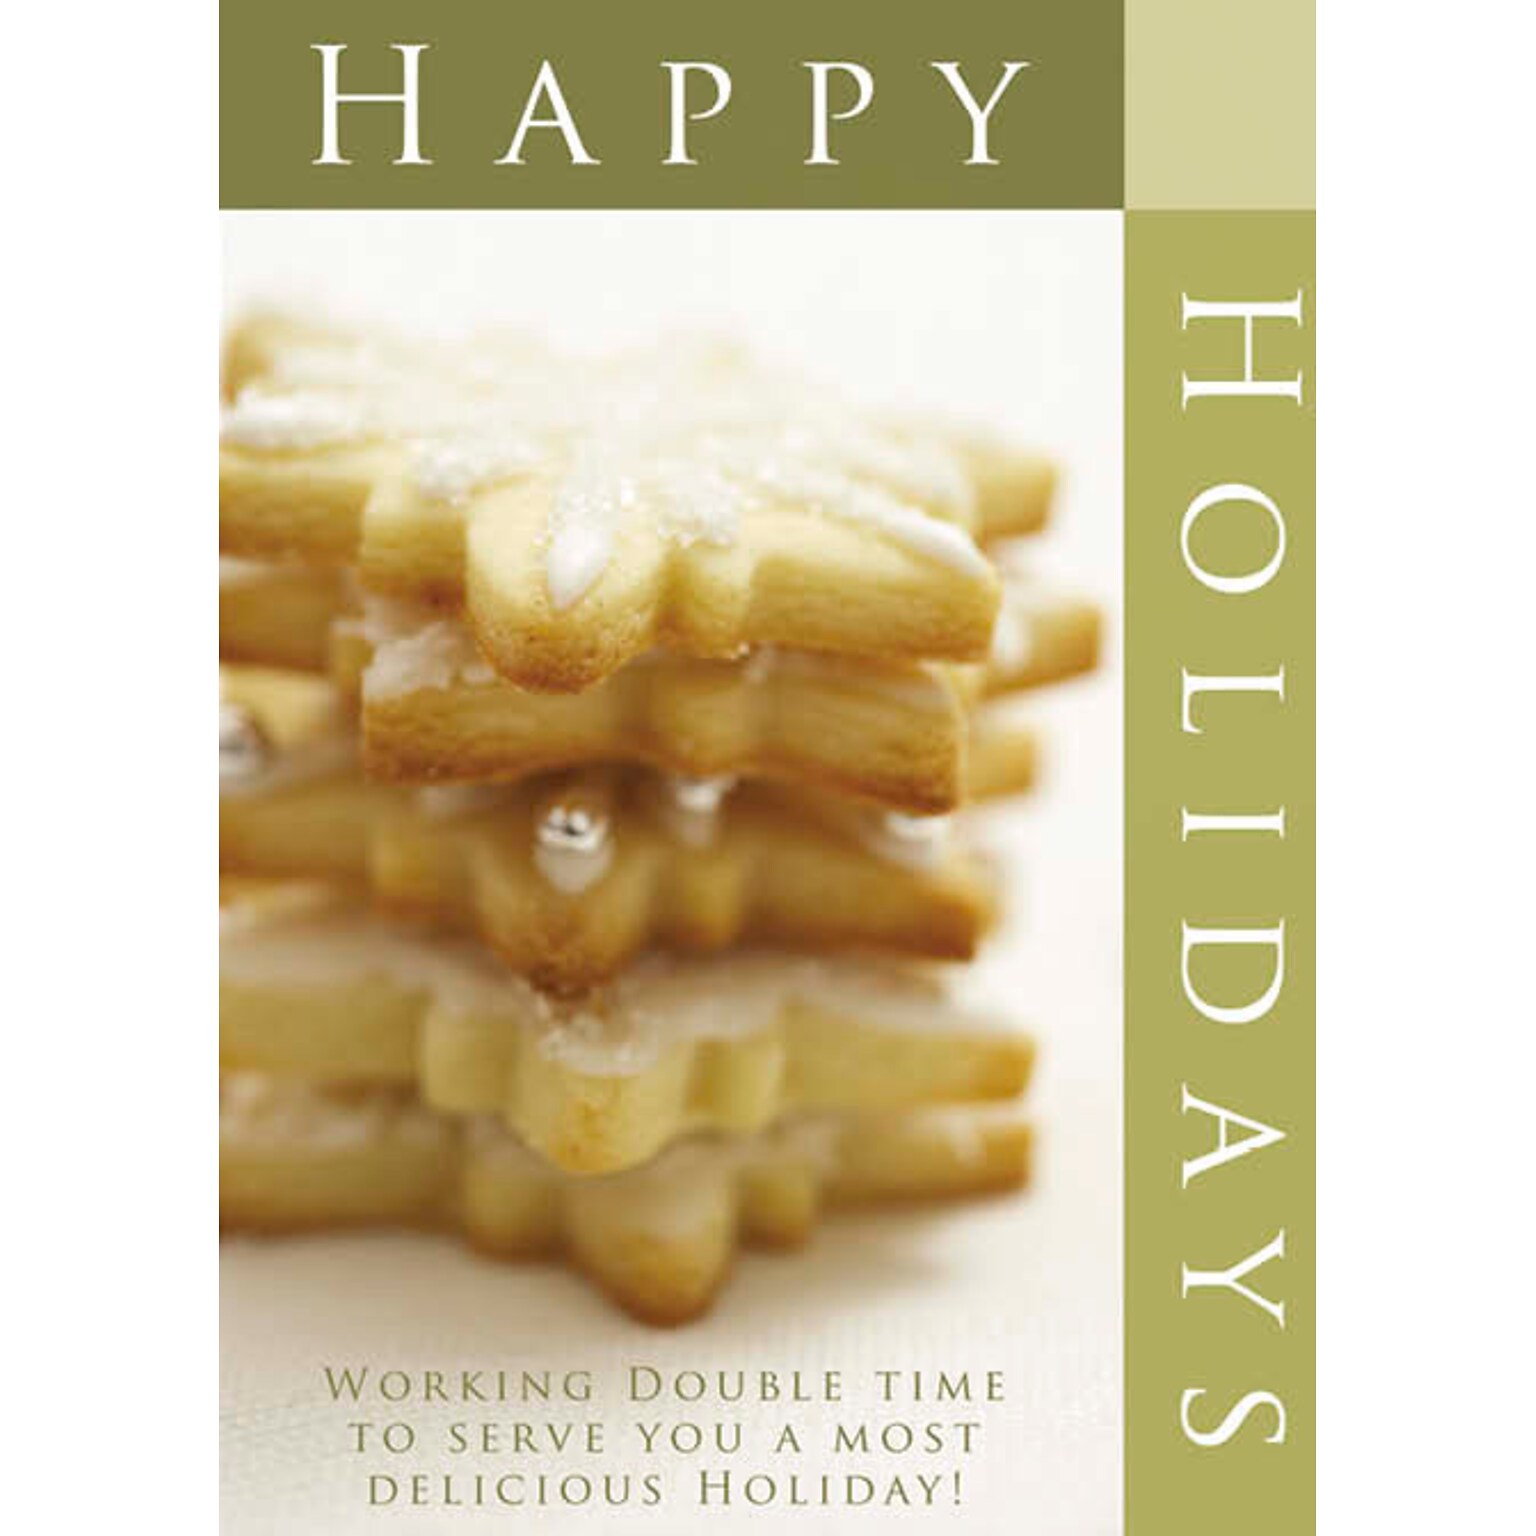 Happy Holidays Working To Serve You A Most Delicious Holiday Greeting Cards, With A7 Envelopes, 7 x 5, 25 Cards per Set